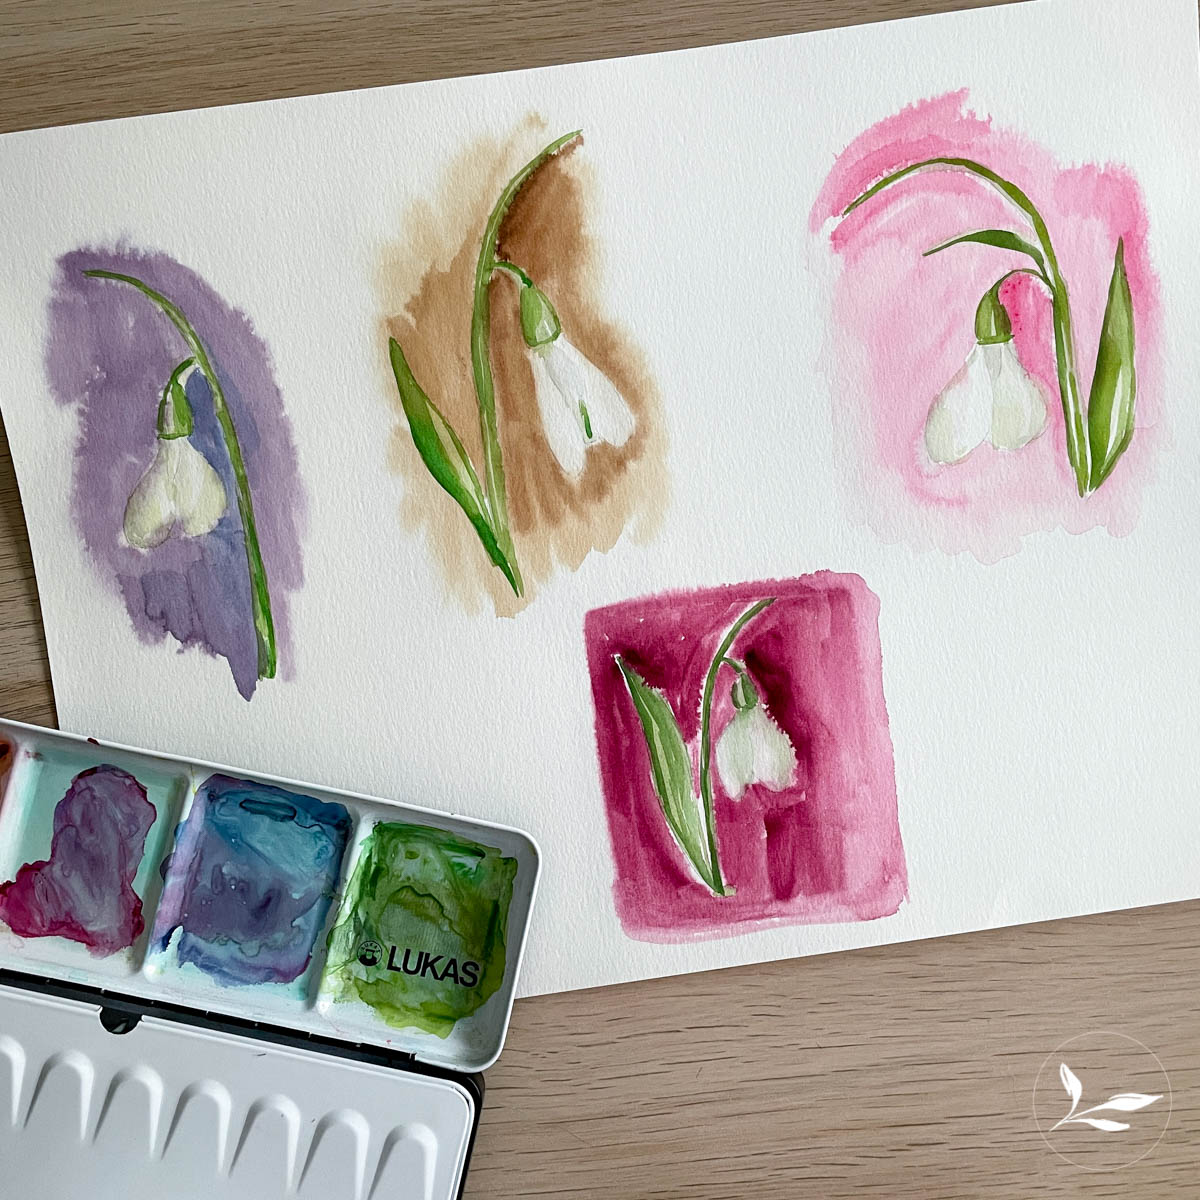 how to paint: watercolor snowdrops